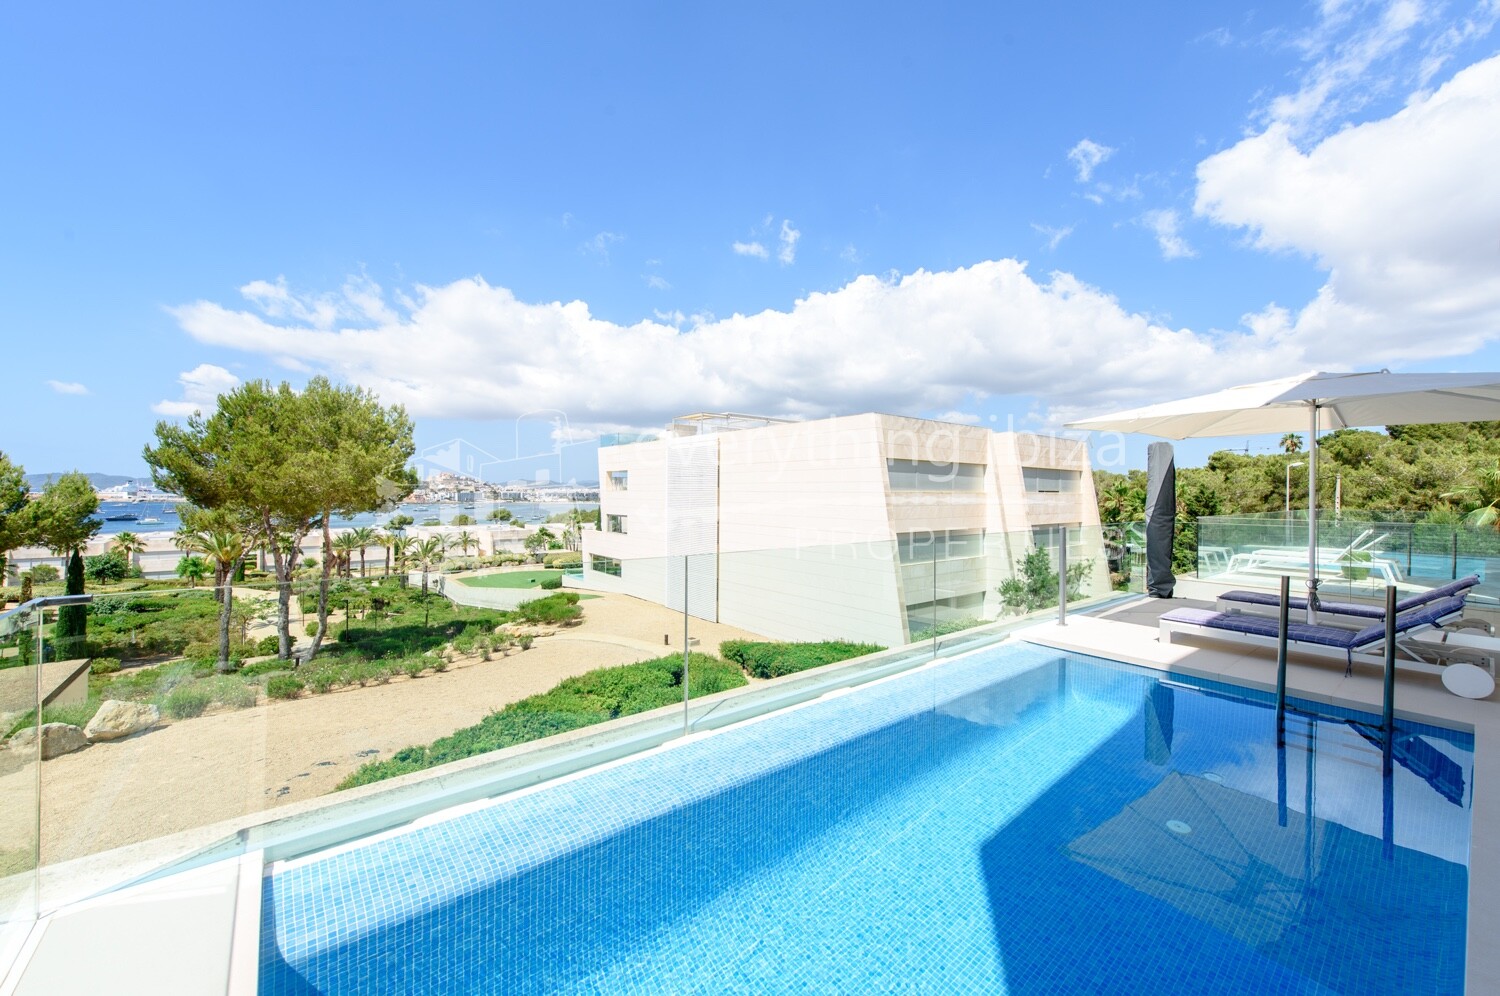 Exclusive Luxurious Apartment with Magnificent Panoramic Views, ref. 1495, for sale in Ibiza by everything ibiza Properties